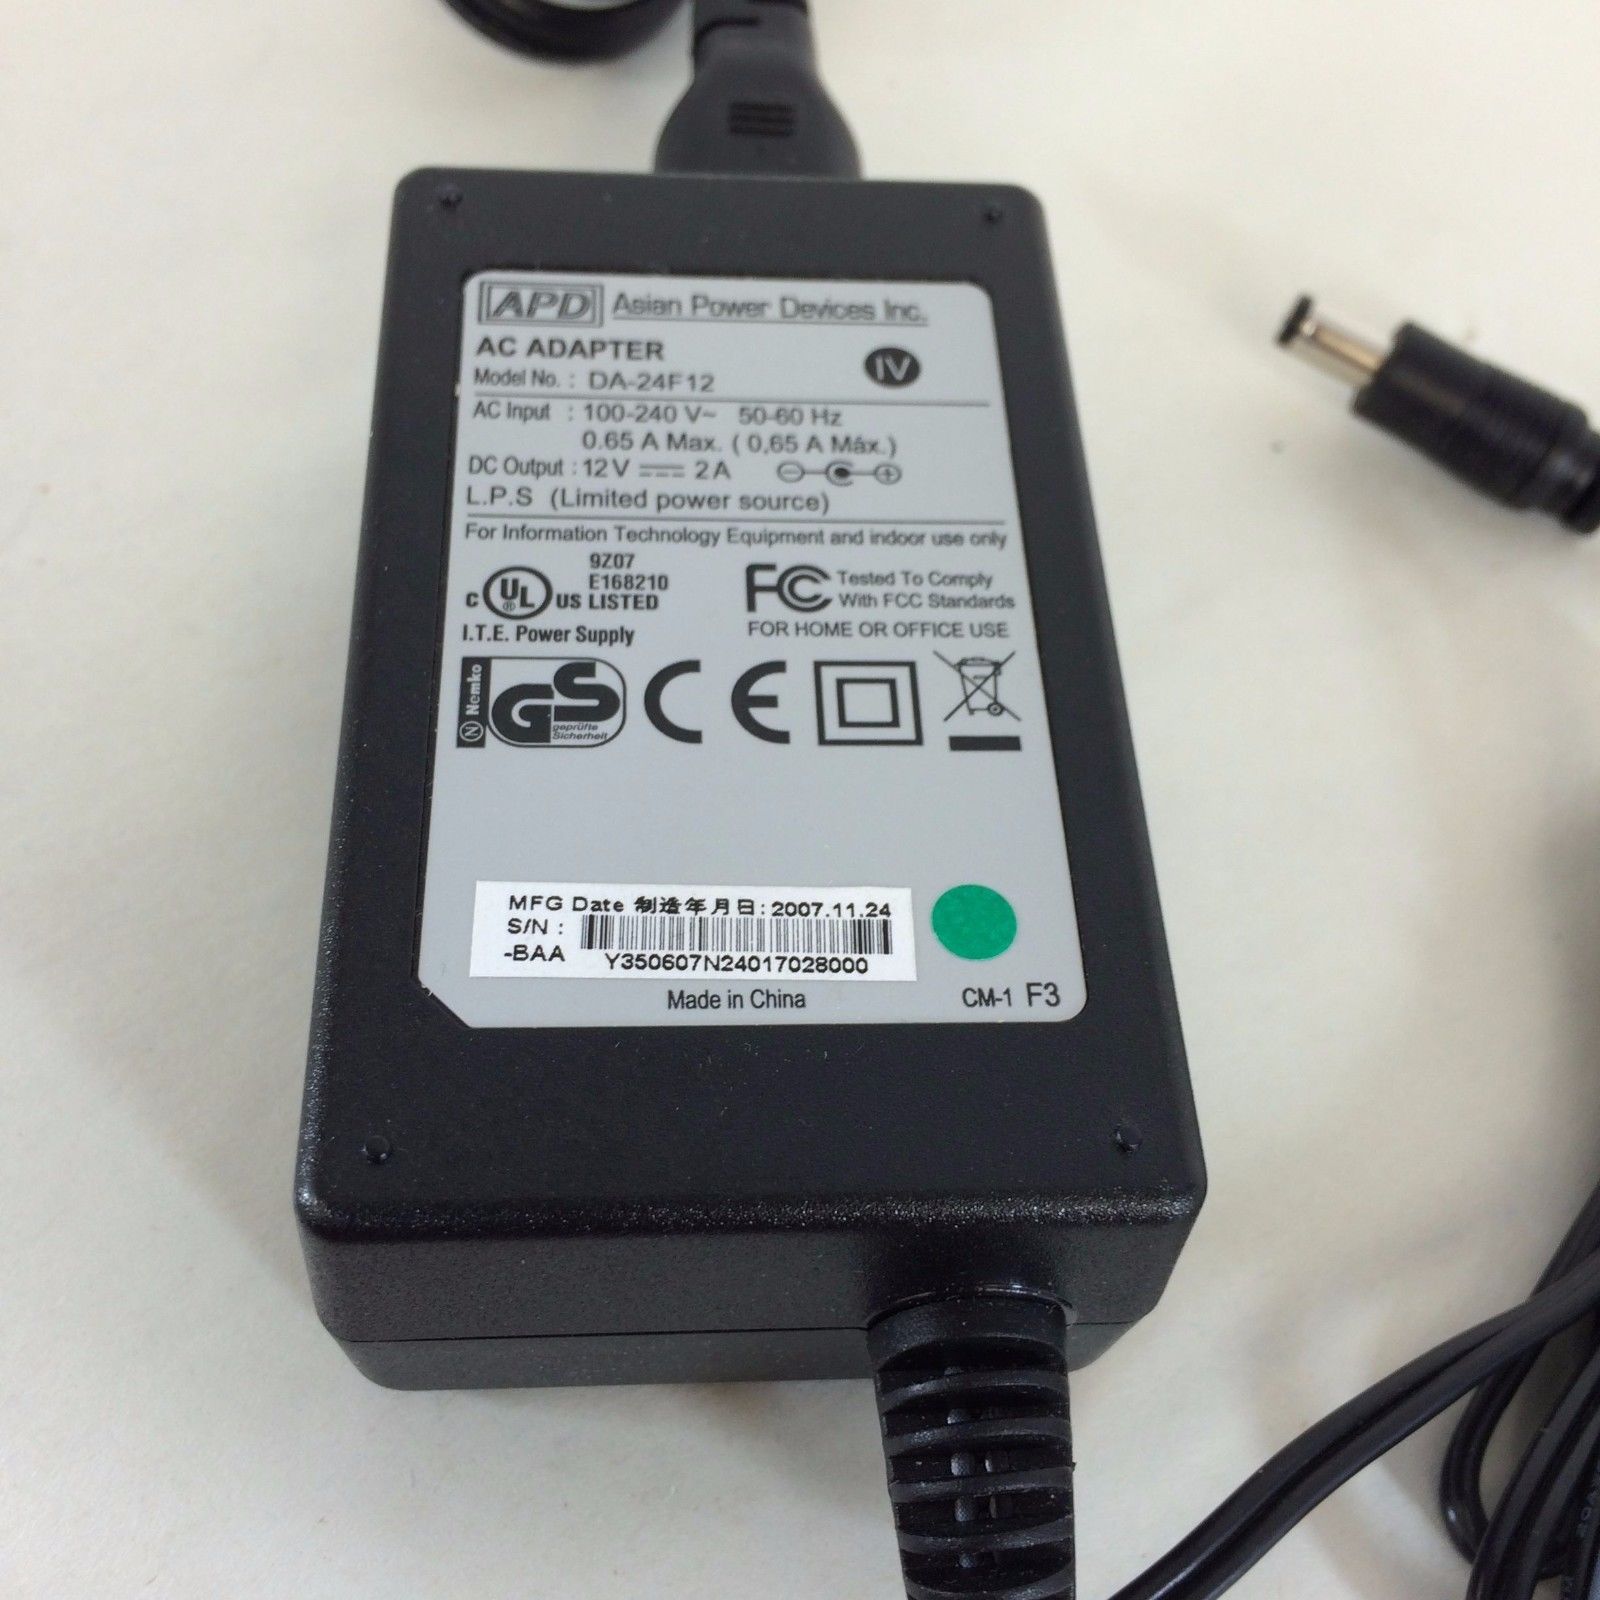 New APD Model DA-24F12 AC Adapter 12V DC 2A 10 asian power devices inc